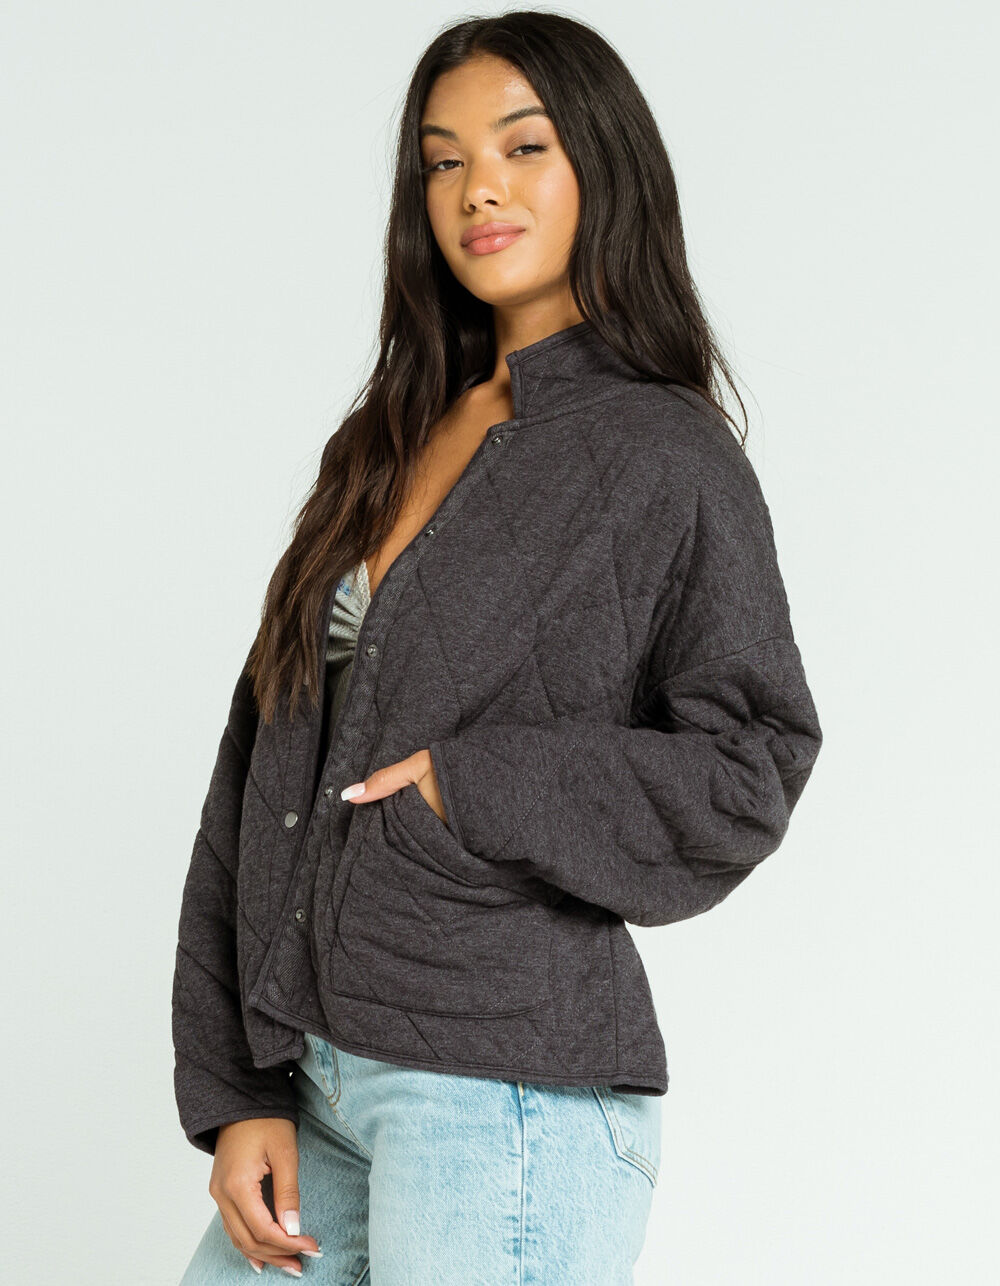 WEST OF MELROSE All The Feels Womens Quilted Jacket - OFF BLACK | Tillys